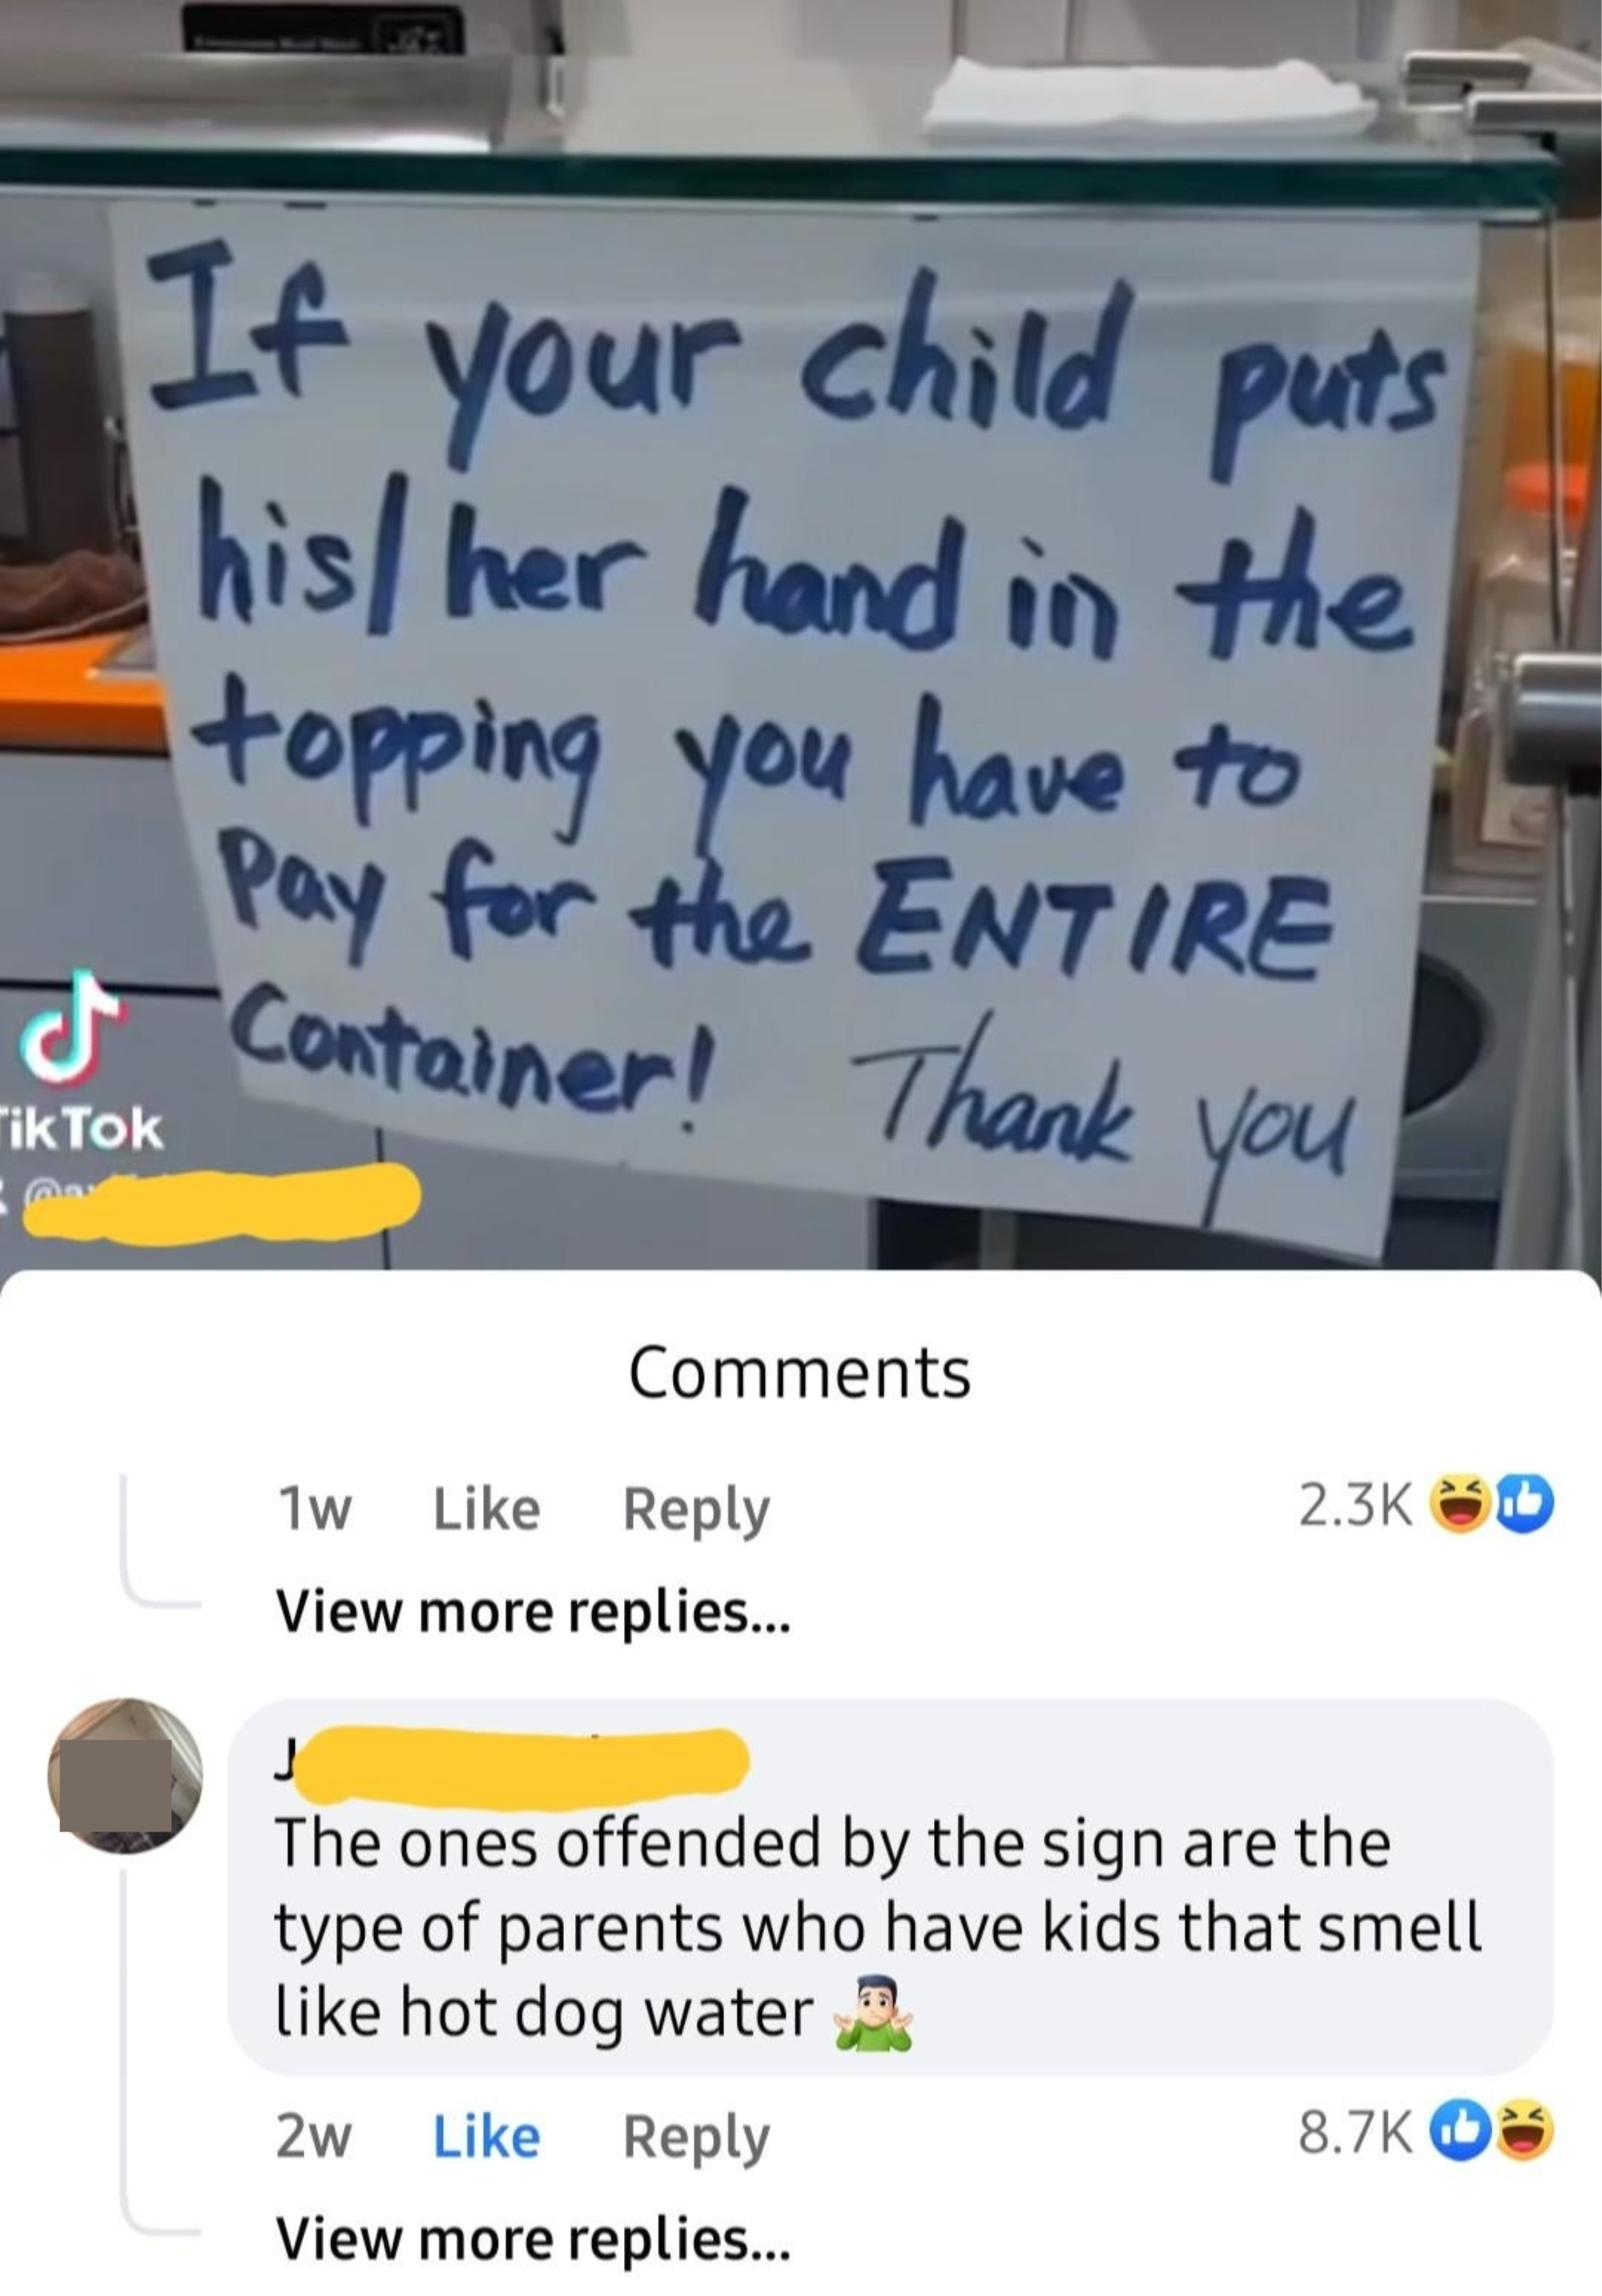 In response to handwritten sign &quot;If your child puts hi/her hand in the topping you have to pay for the entire container,&quot; person responds, &quot;The ones offended by the sign are the type of parents who have kids that smell like hot dog water&quot;